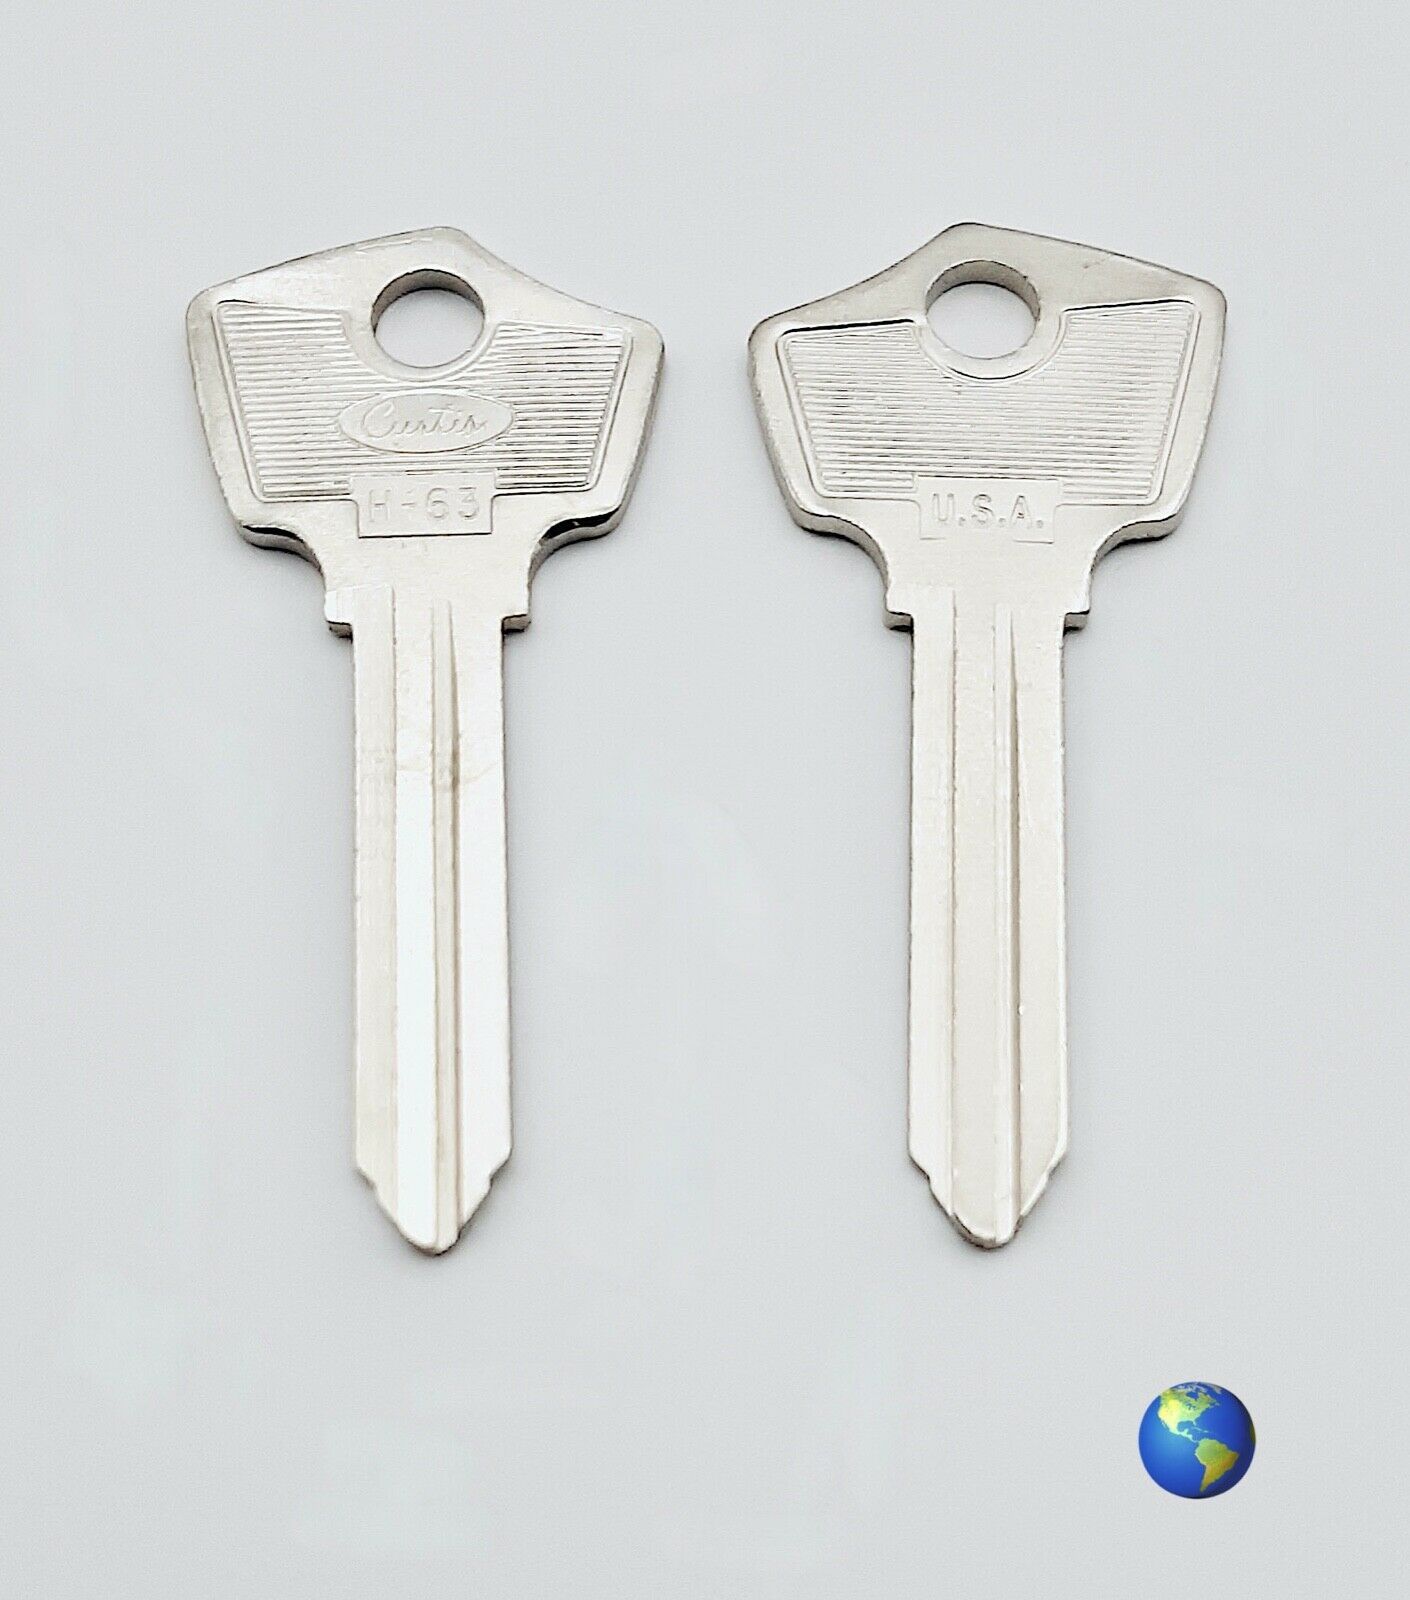 H-63 Key Blanks for Various Models by Ford and Mercury (5 Keys)